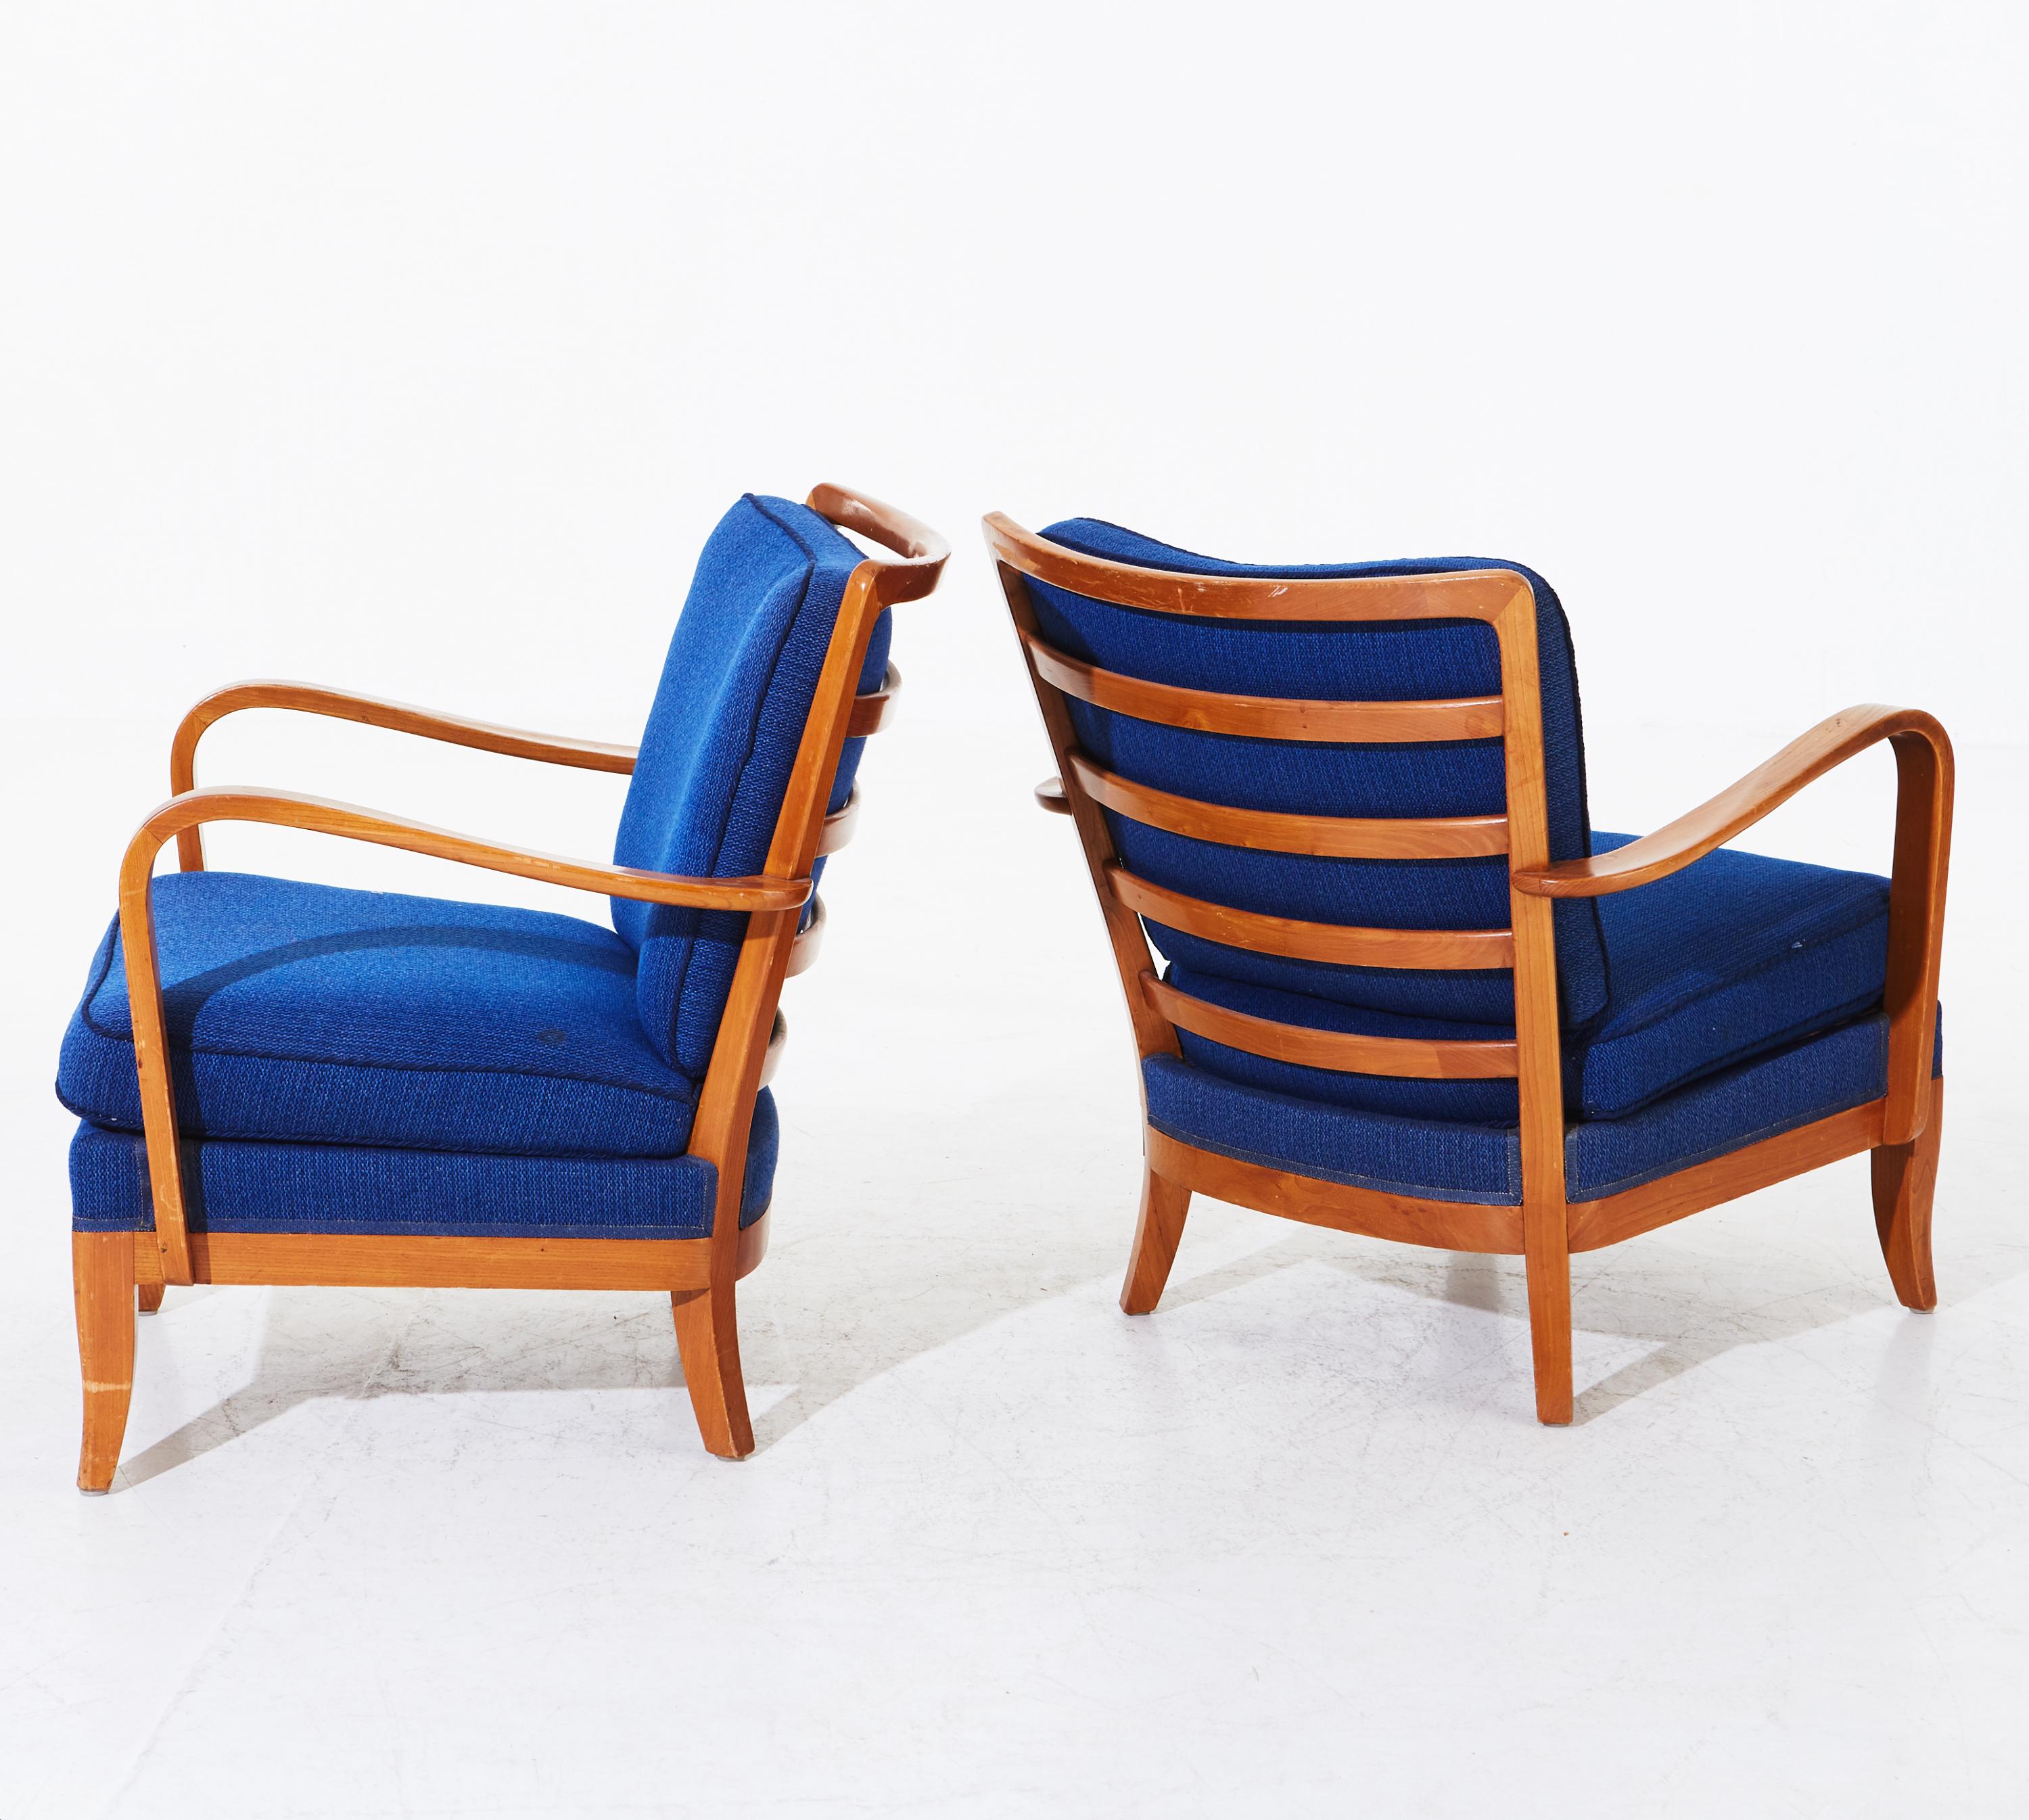 European Pair of Mid Century Modern Accent Lounge Chairs with Blue Upholstery